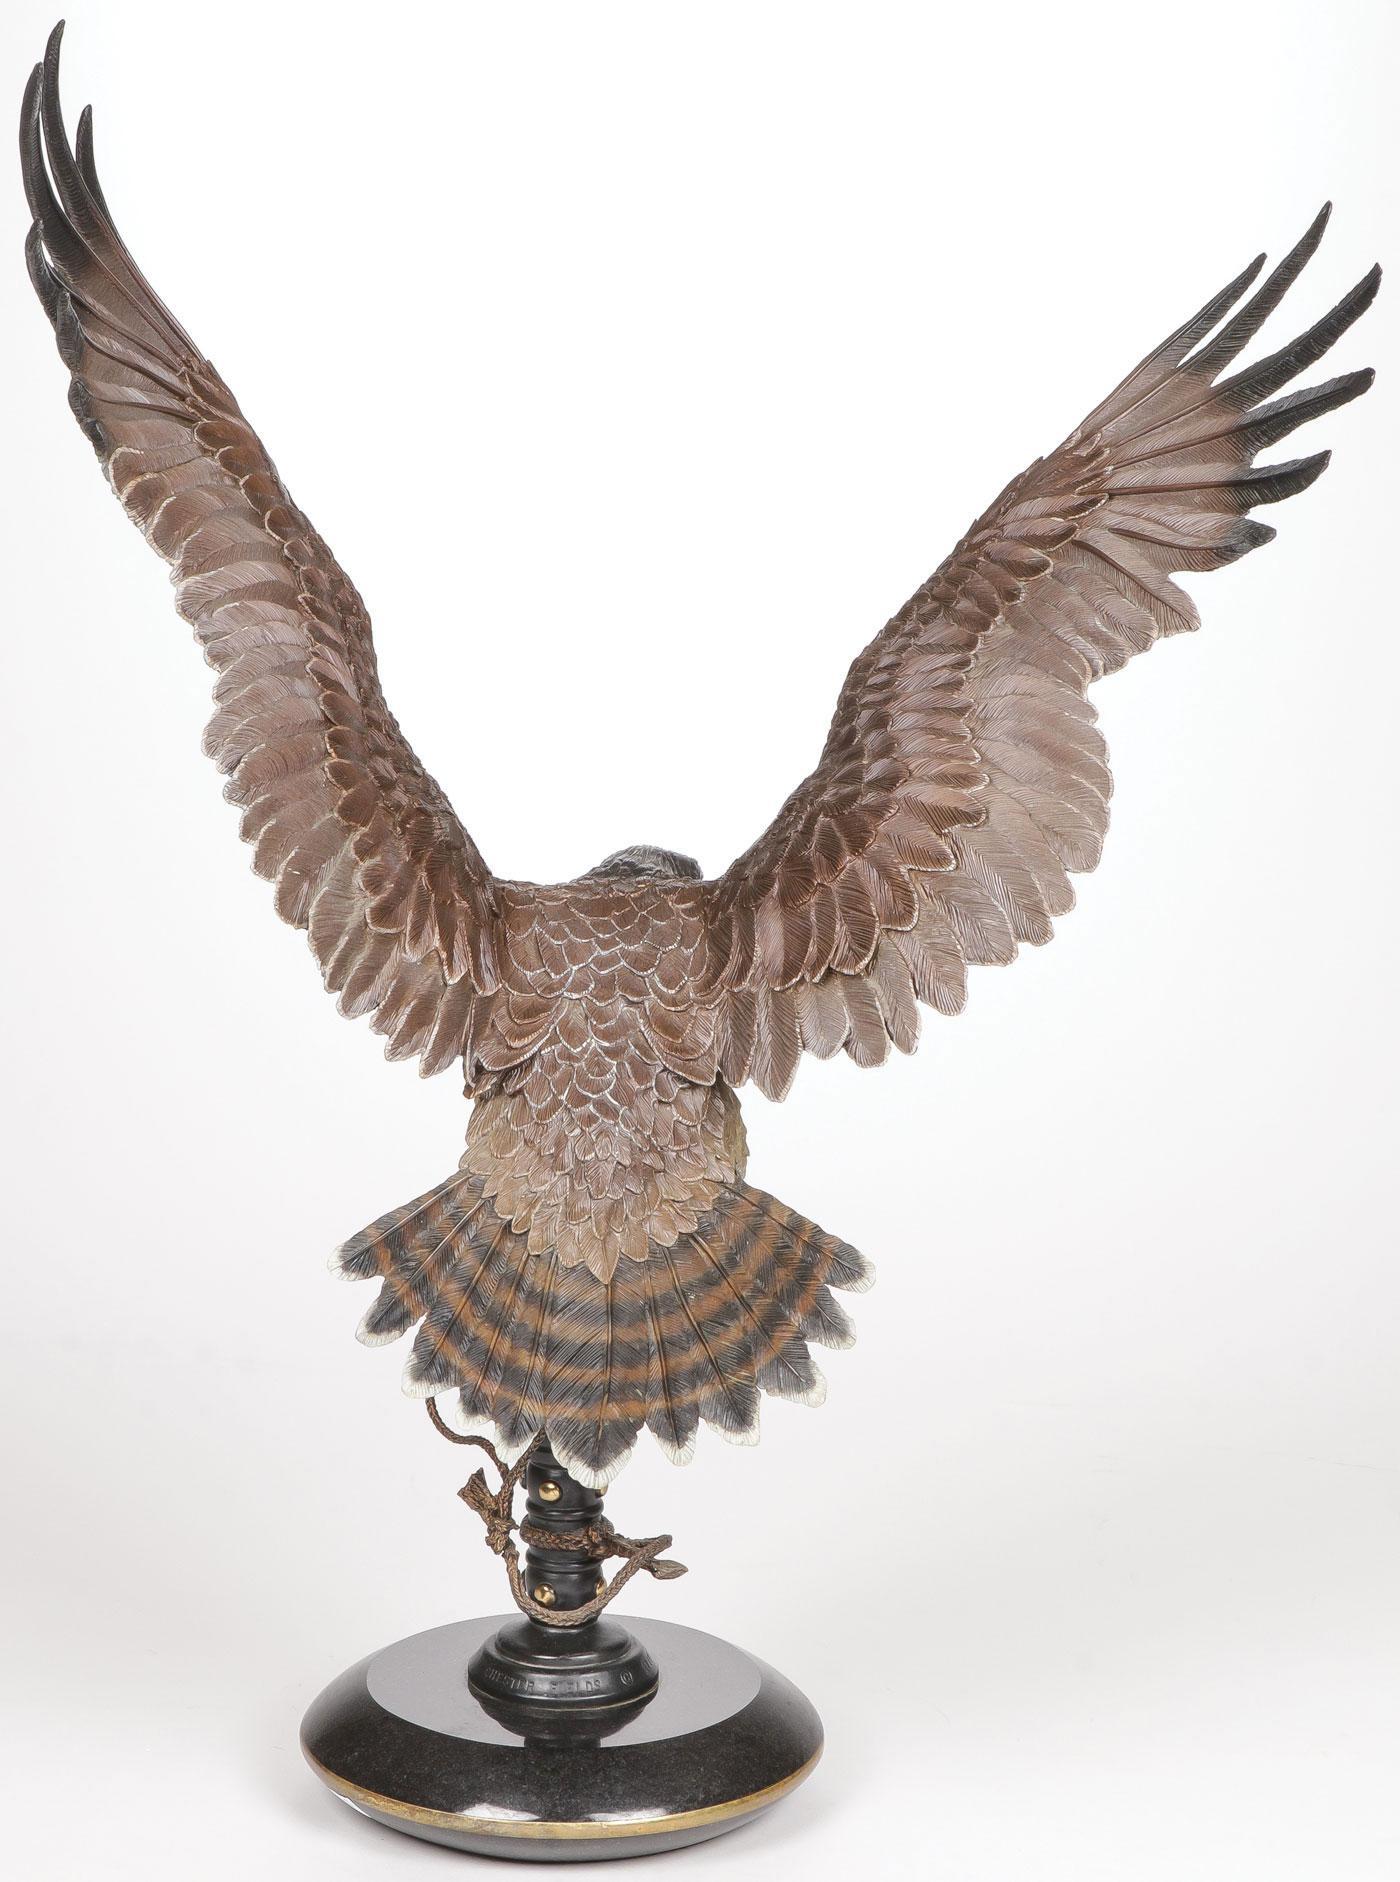 Bronzed Chester Fields 'Falcon Crest', Full Round Sculpture Signed Art W/ 24kt. Details For Sale